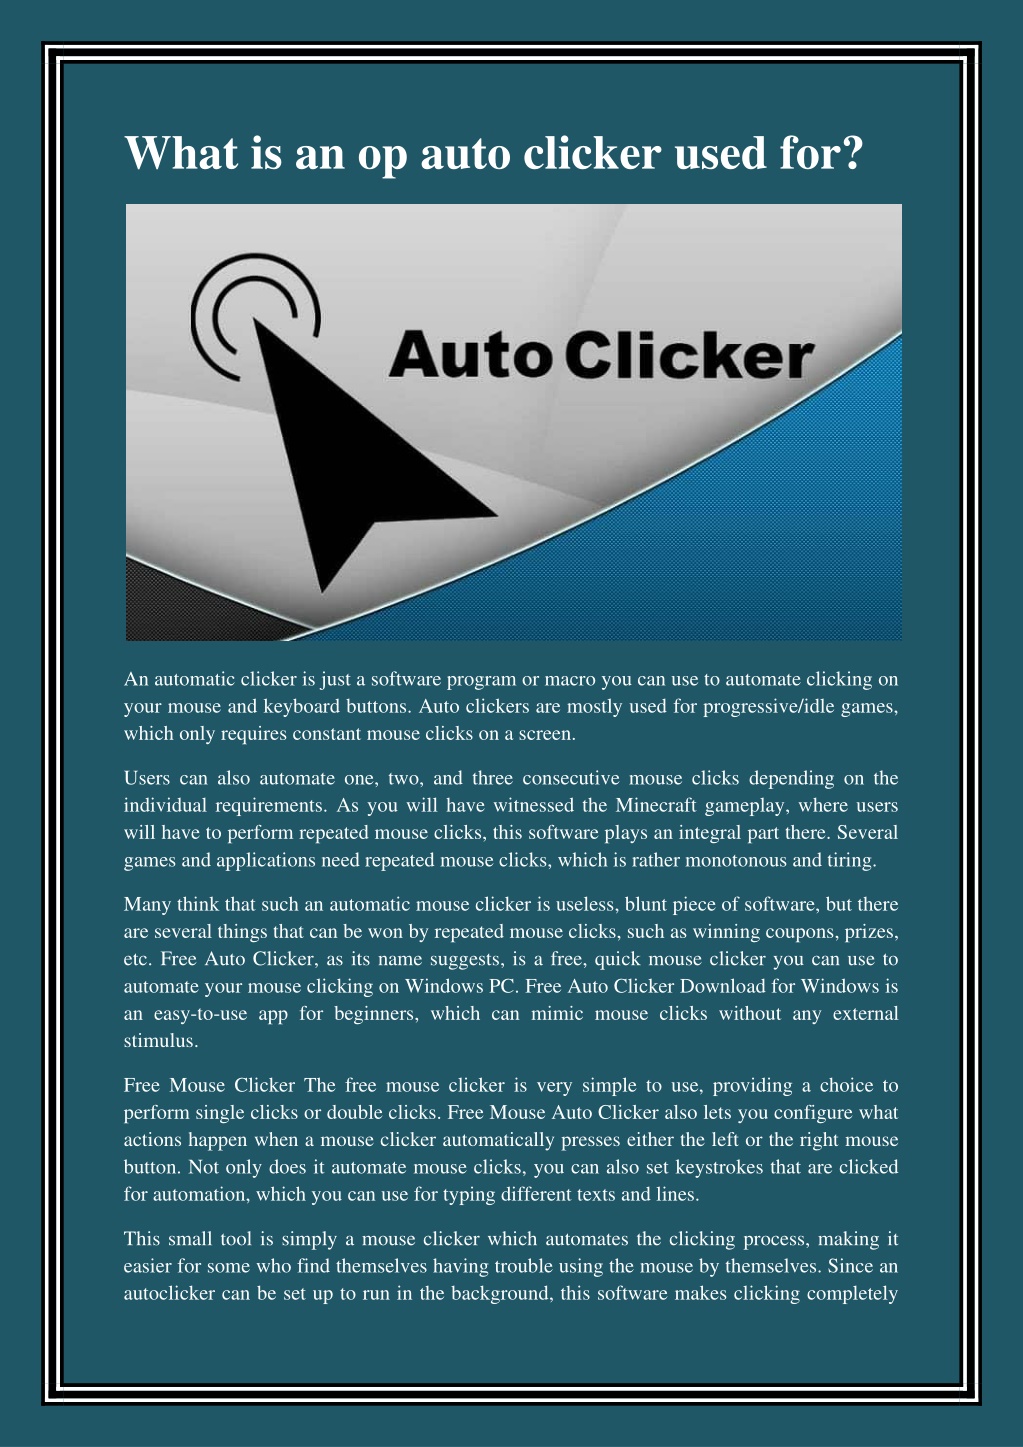 How a novice uses an automatic clicker to take a video without anyone - Auto  clicker